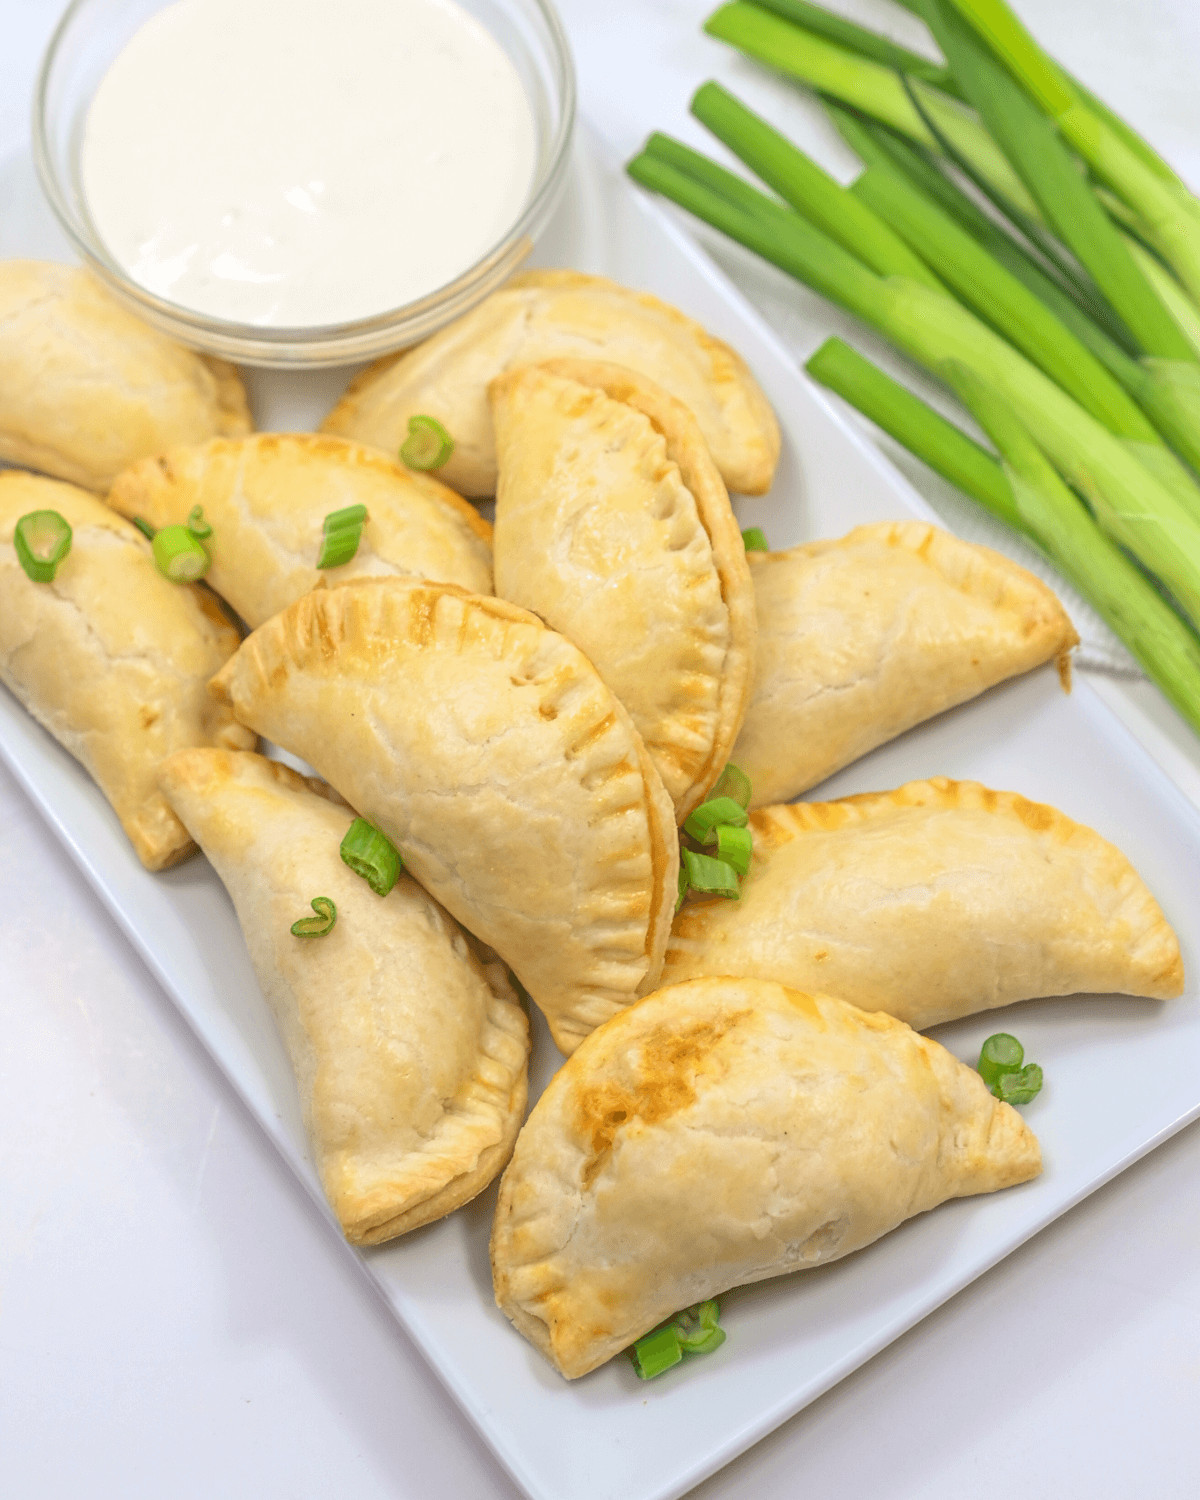 Chicken empanadas served on a white plate with a dip.